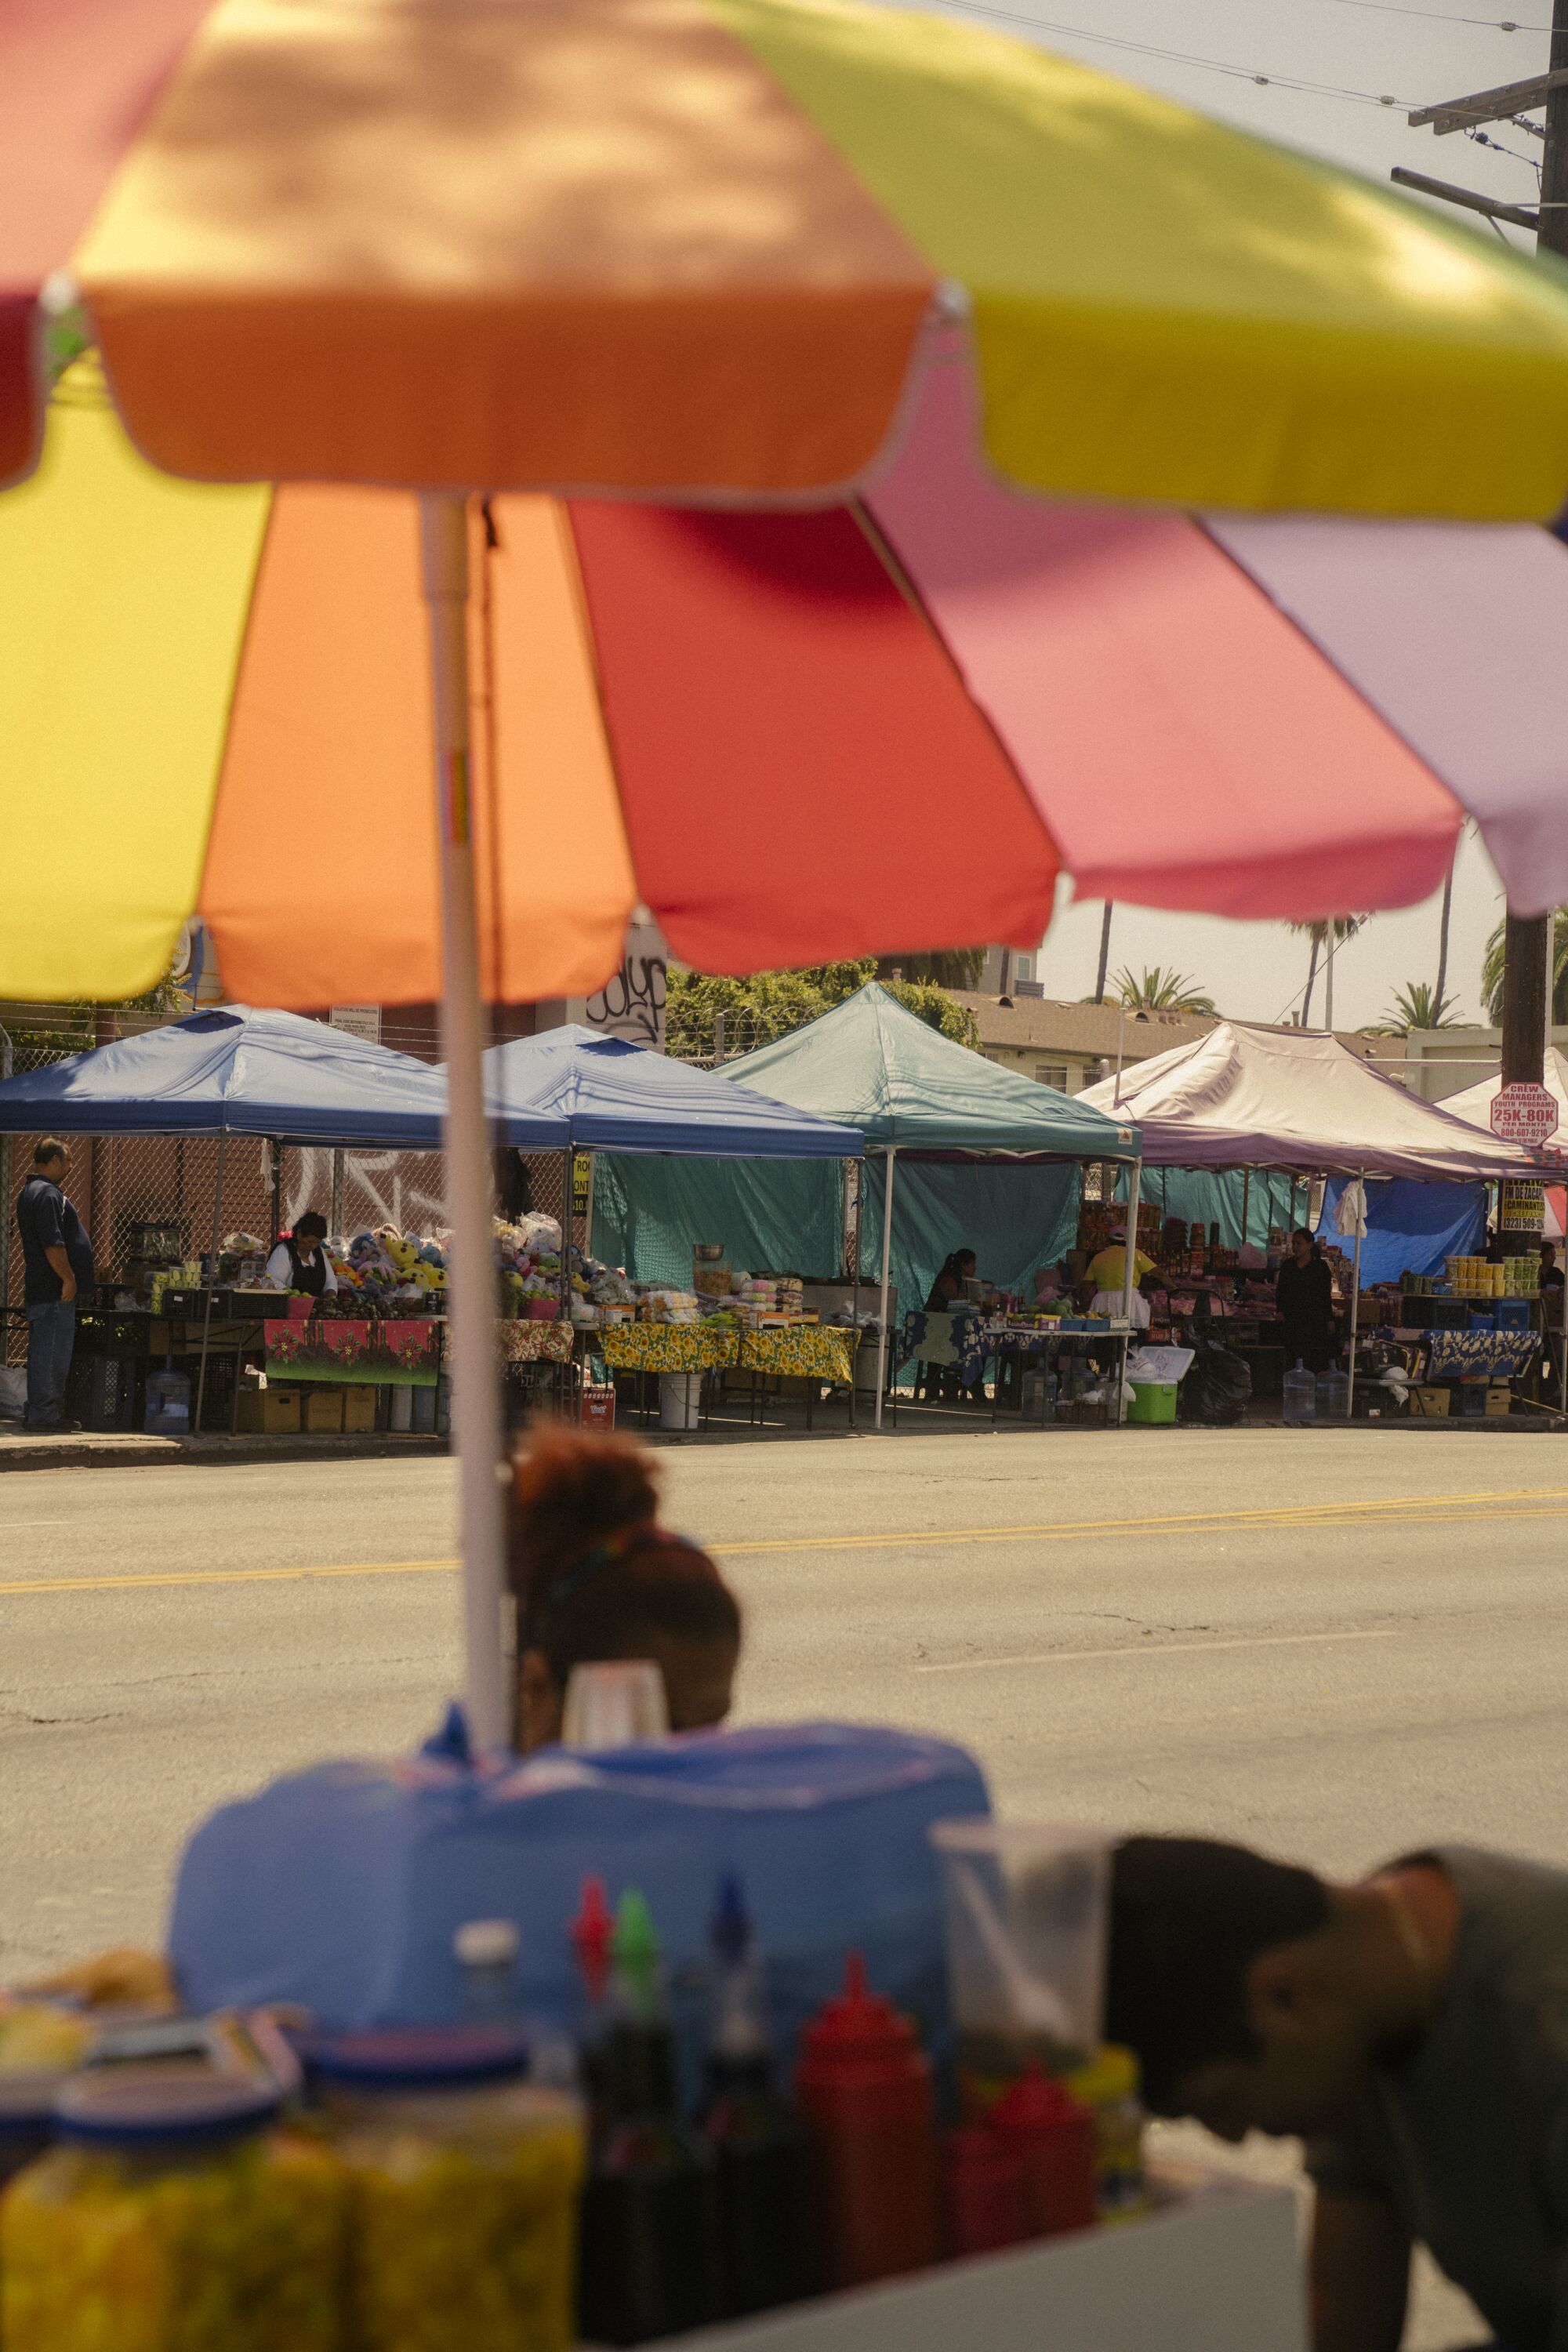 Some of the displaced vendors moved across the street, slightly south of their original location on Vermont Avenue.